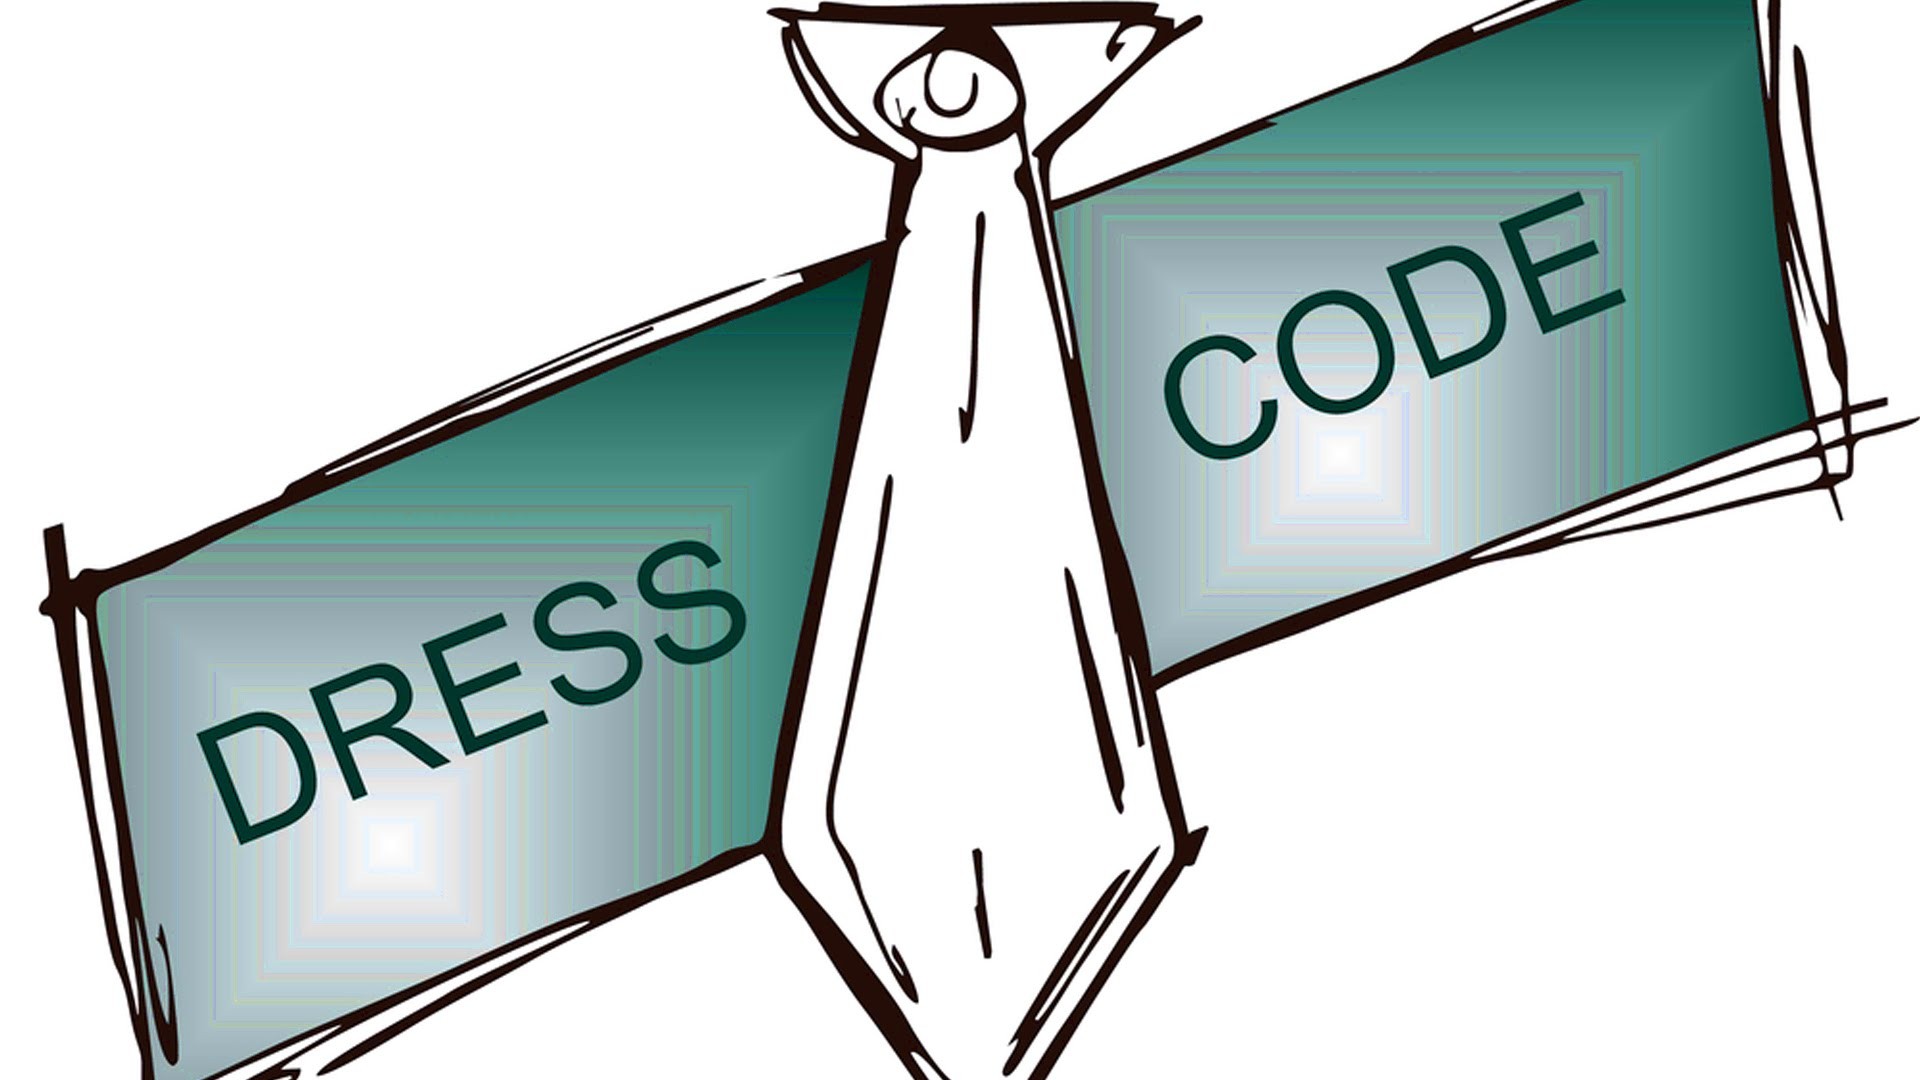 Coding clipart Best of DRESS CODE » Clipart Station.